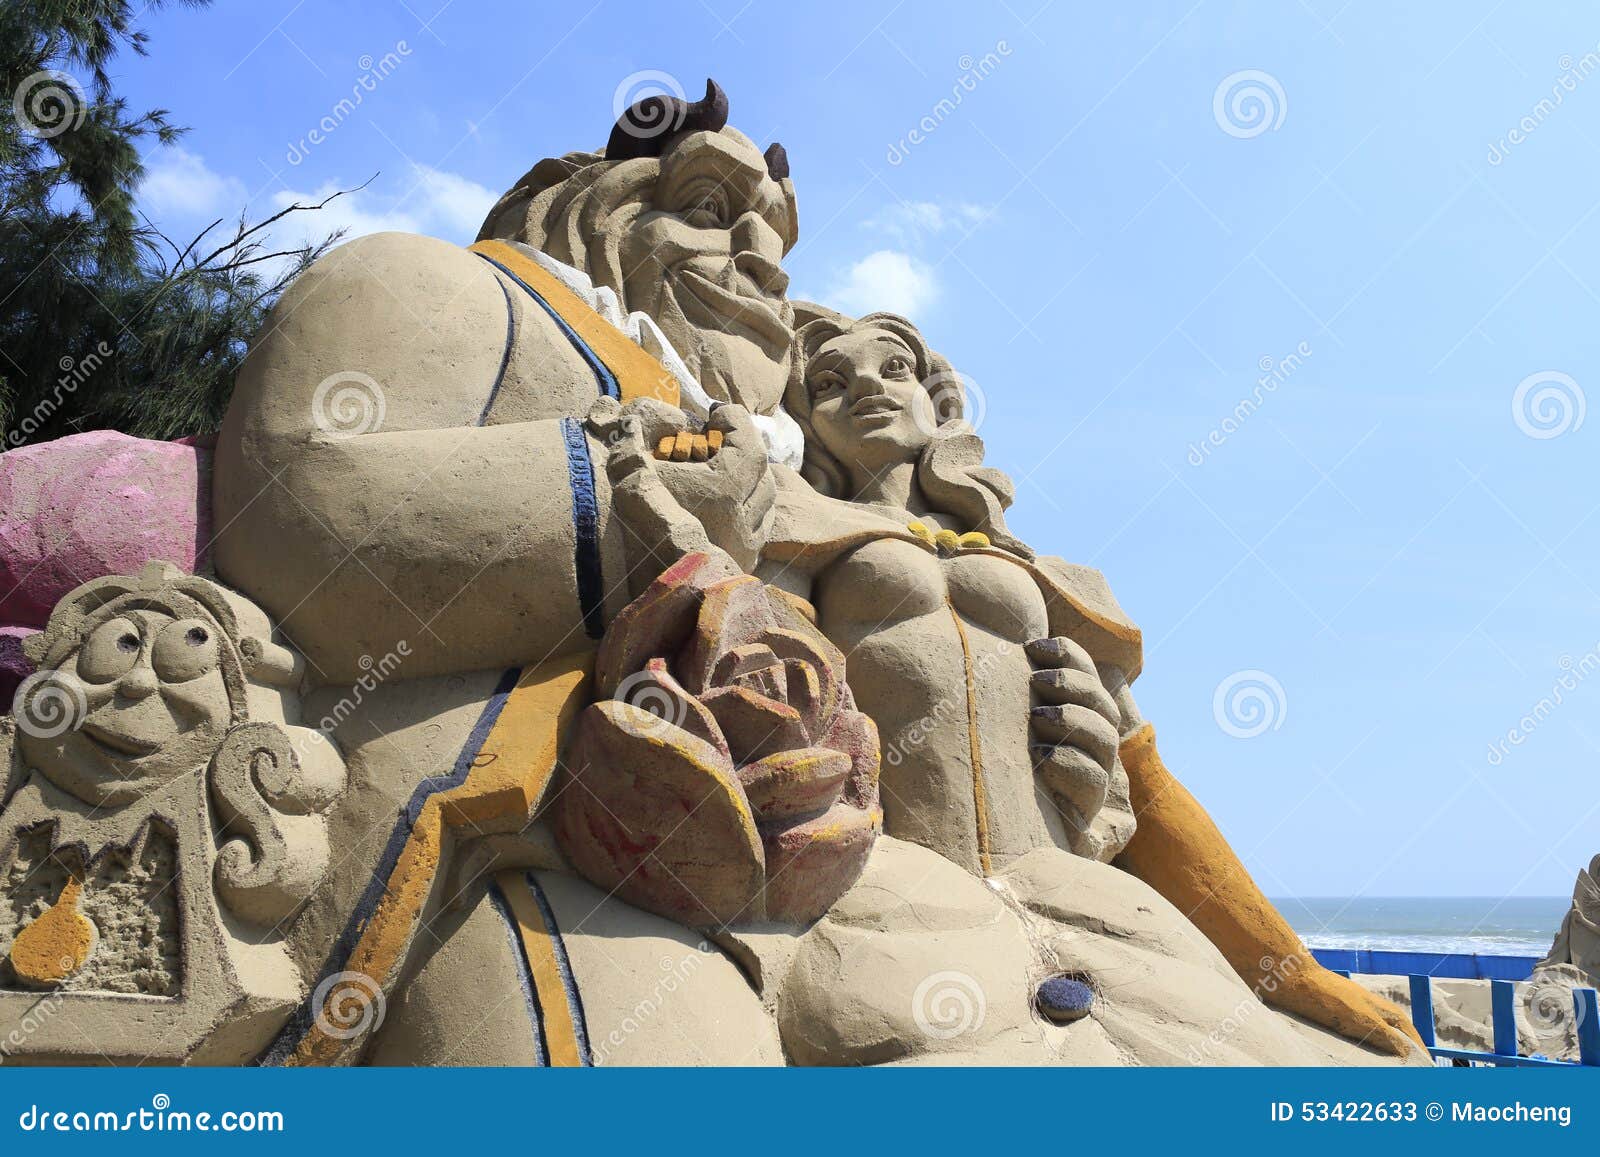 beauty and the beast sand sculpture